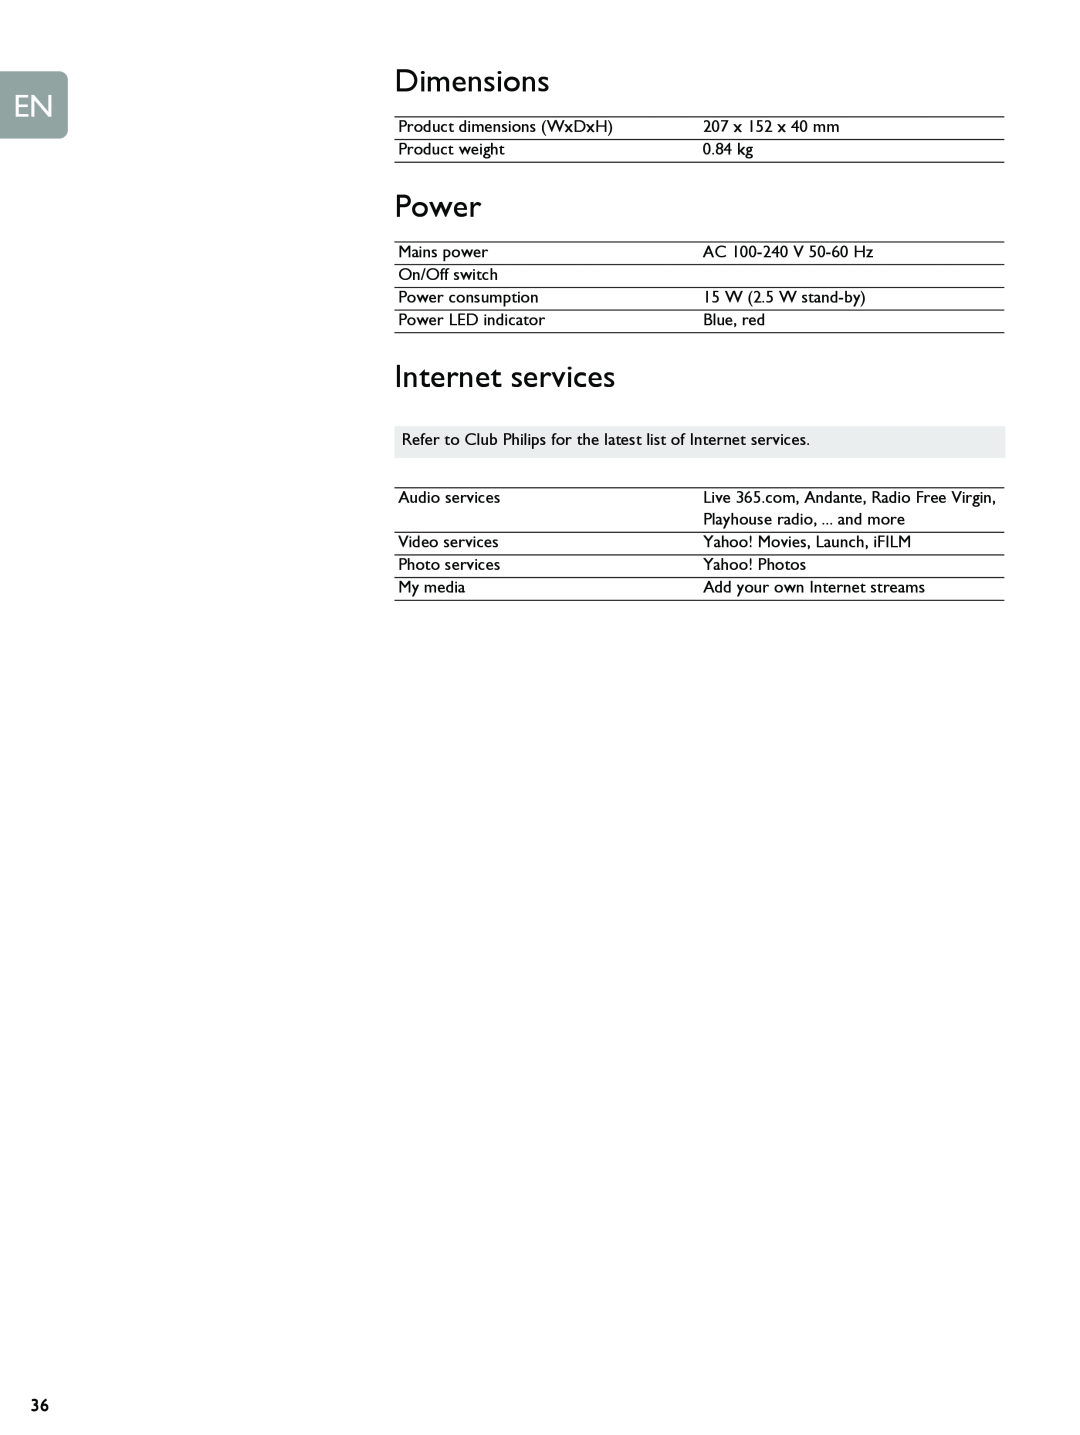 Philips SLM5500 user manual Dimensions, Power, Internet services 